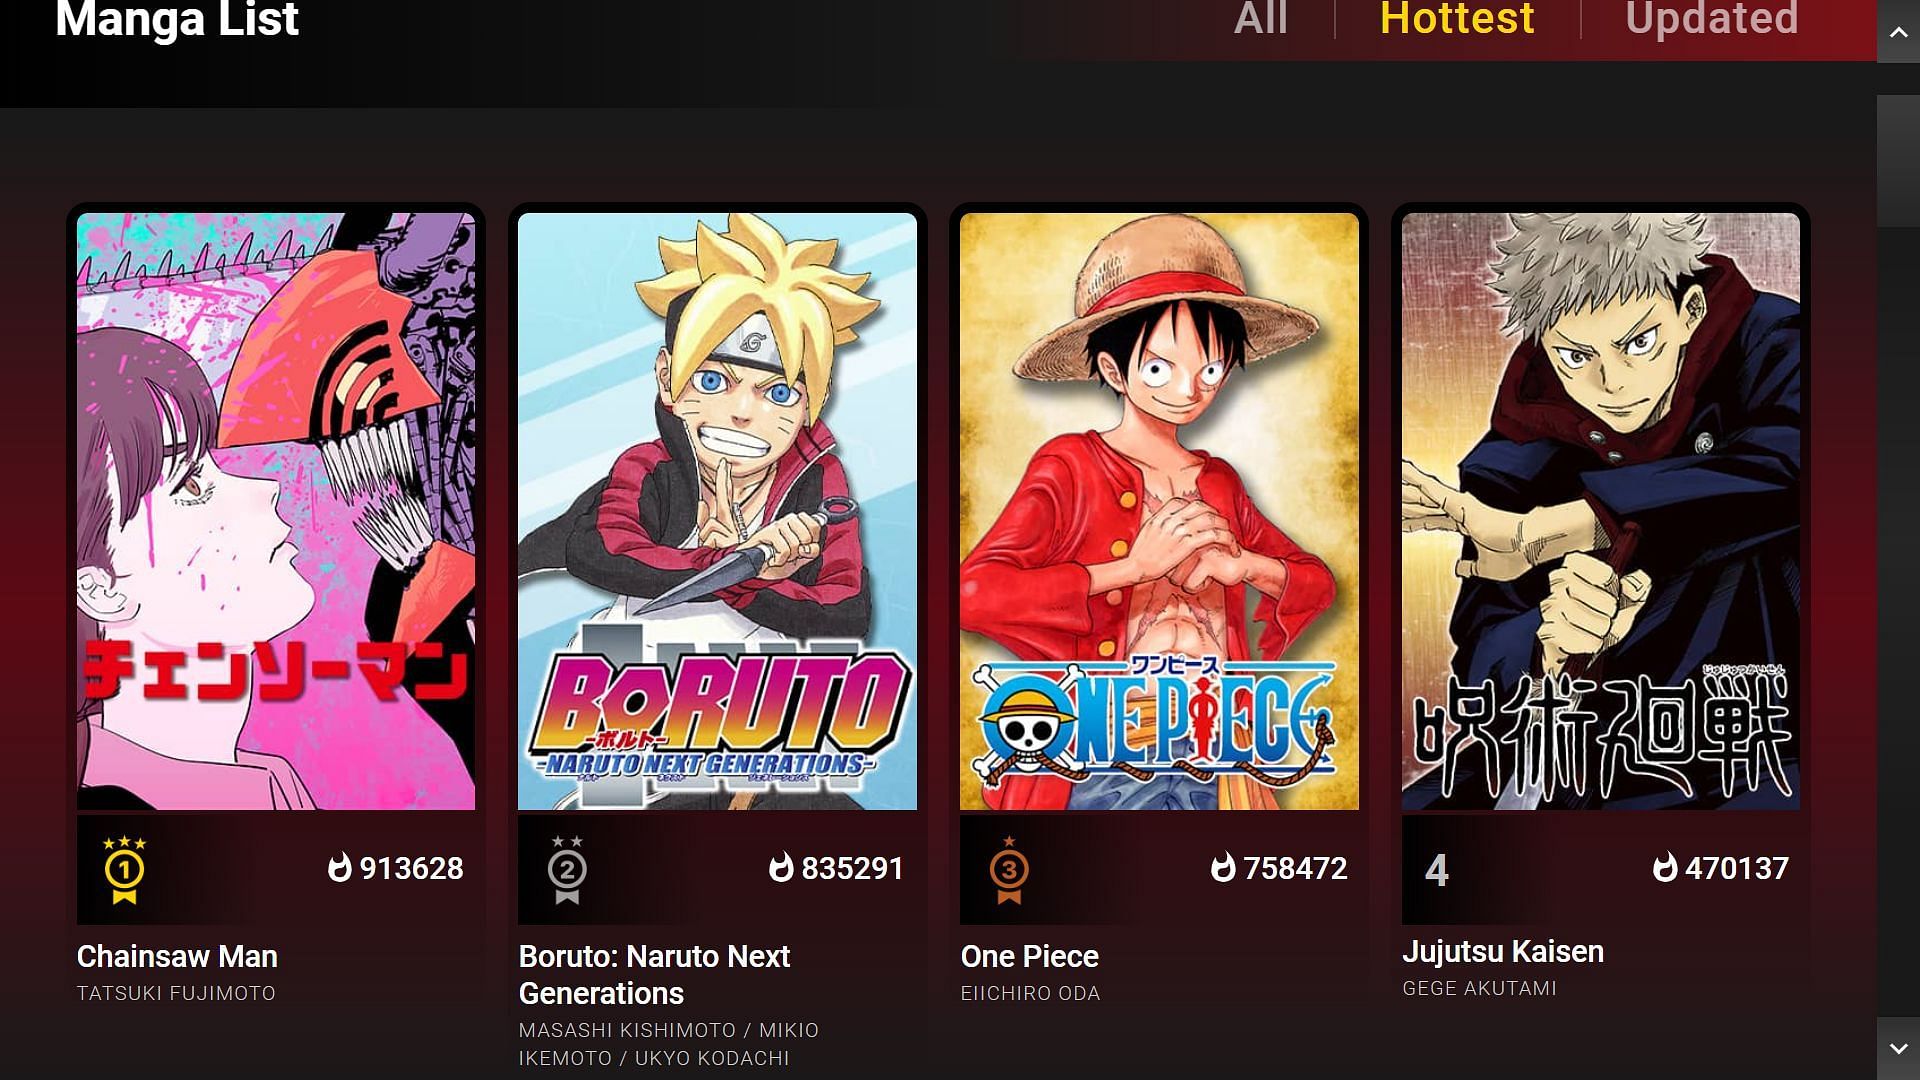 Boruto: Naruto Next Generations garners more reads that One Piece after the release of Chapter 80 (Screengrab vis Shueisha)